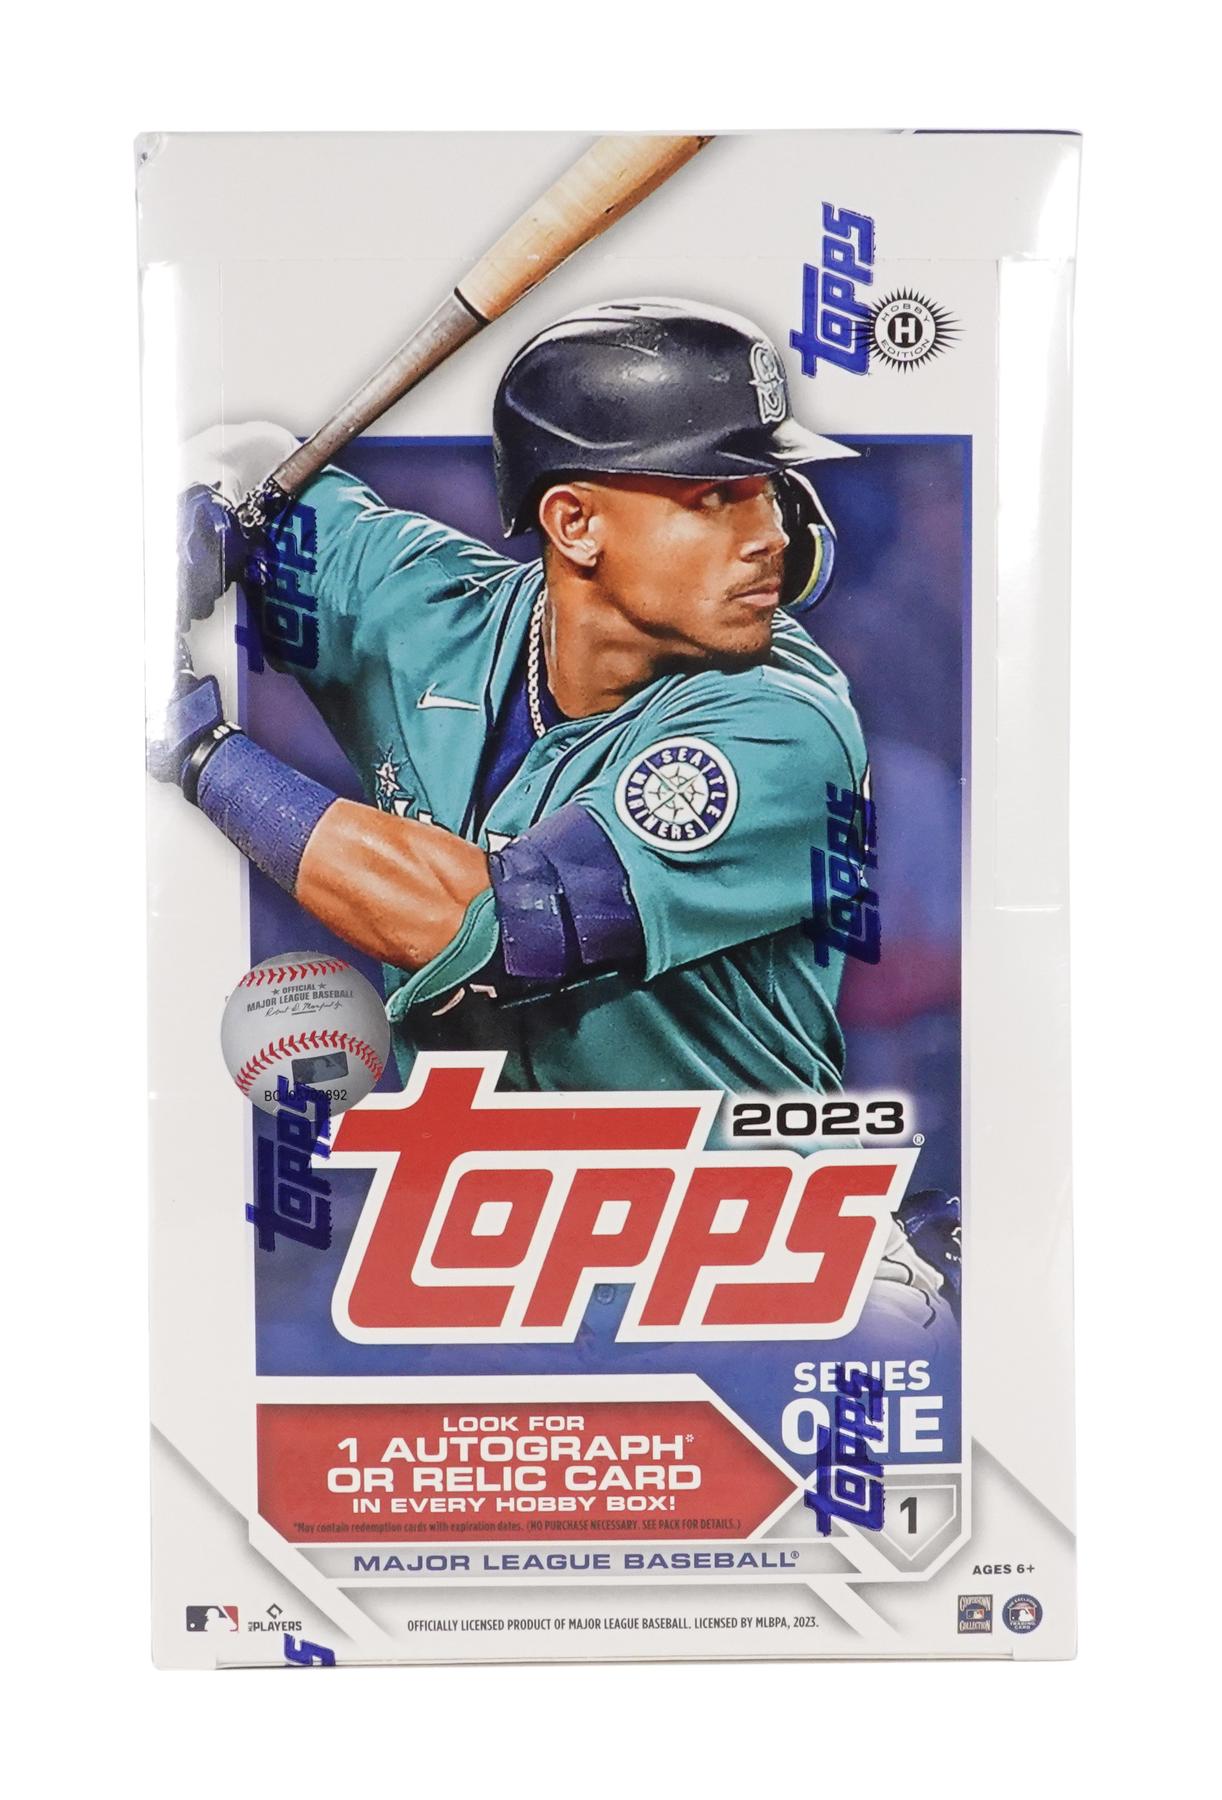 Seattle Mariners 2015 Topps Complete Series One and Two Regular Issue